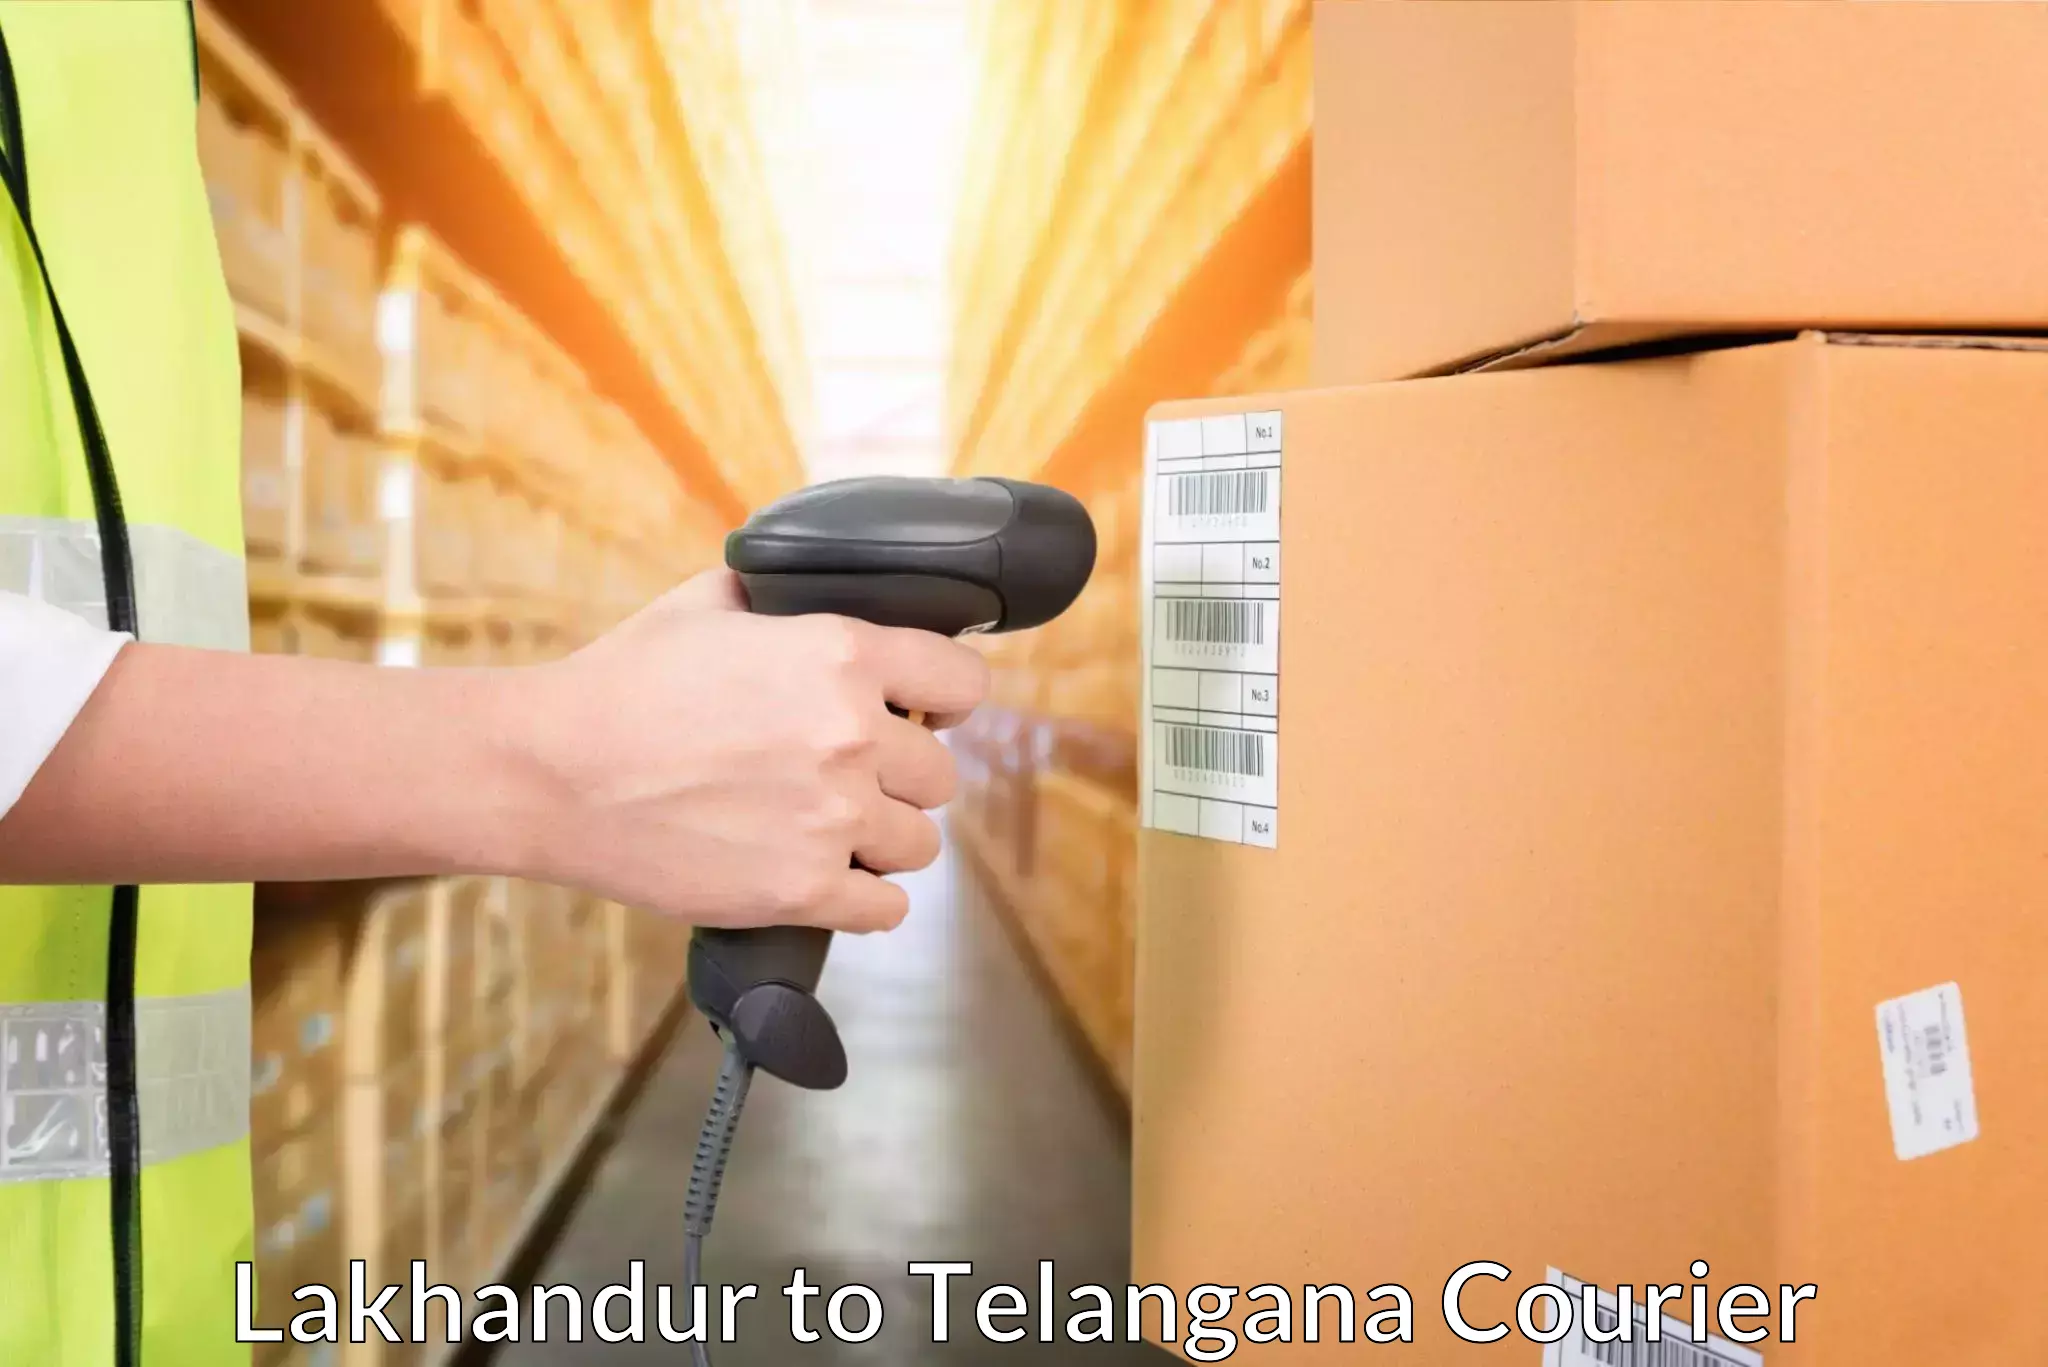 User-friendly delivery service Lakhandur to Ghanpur